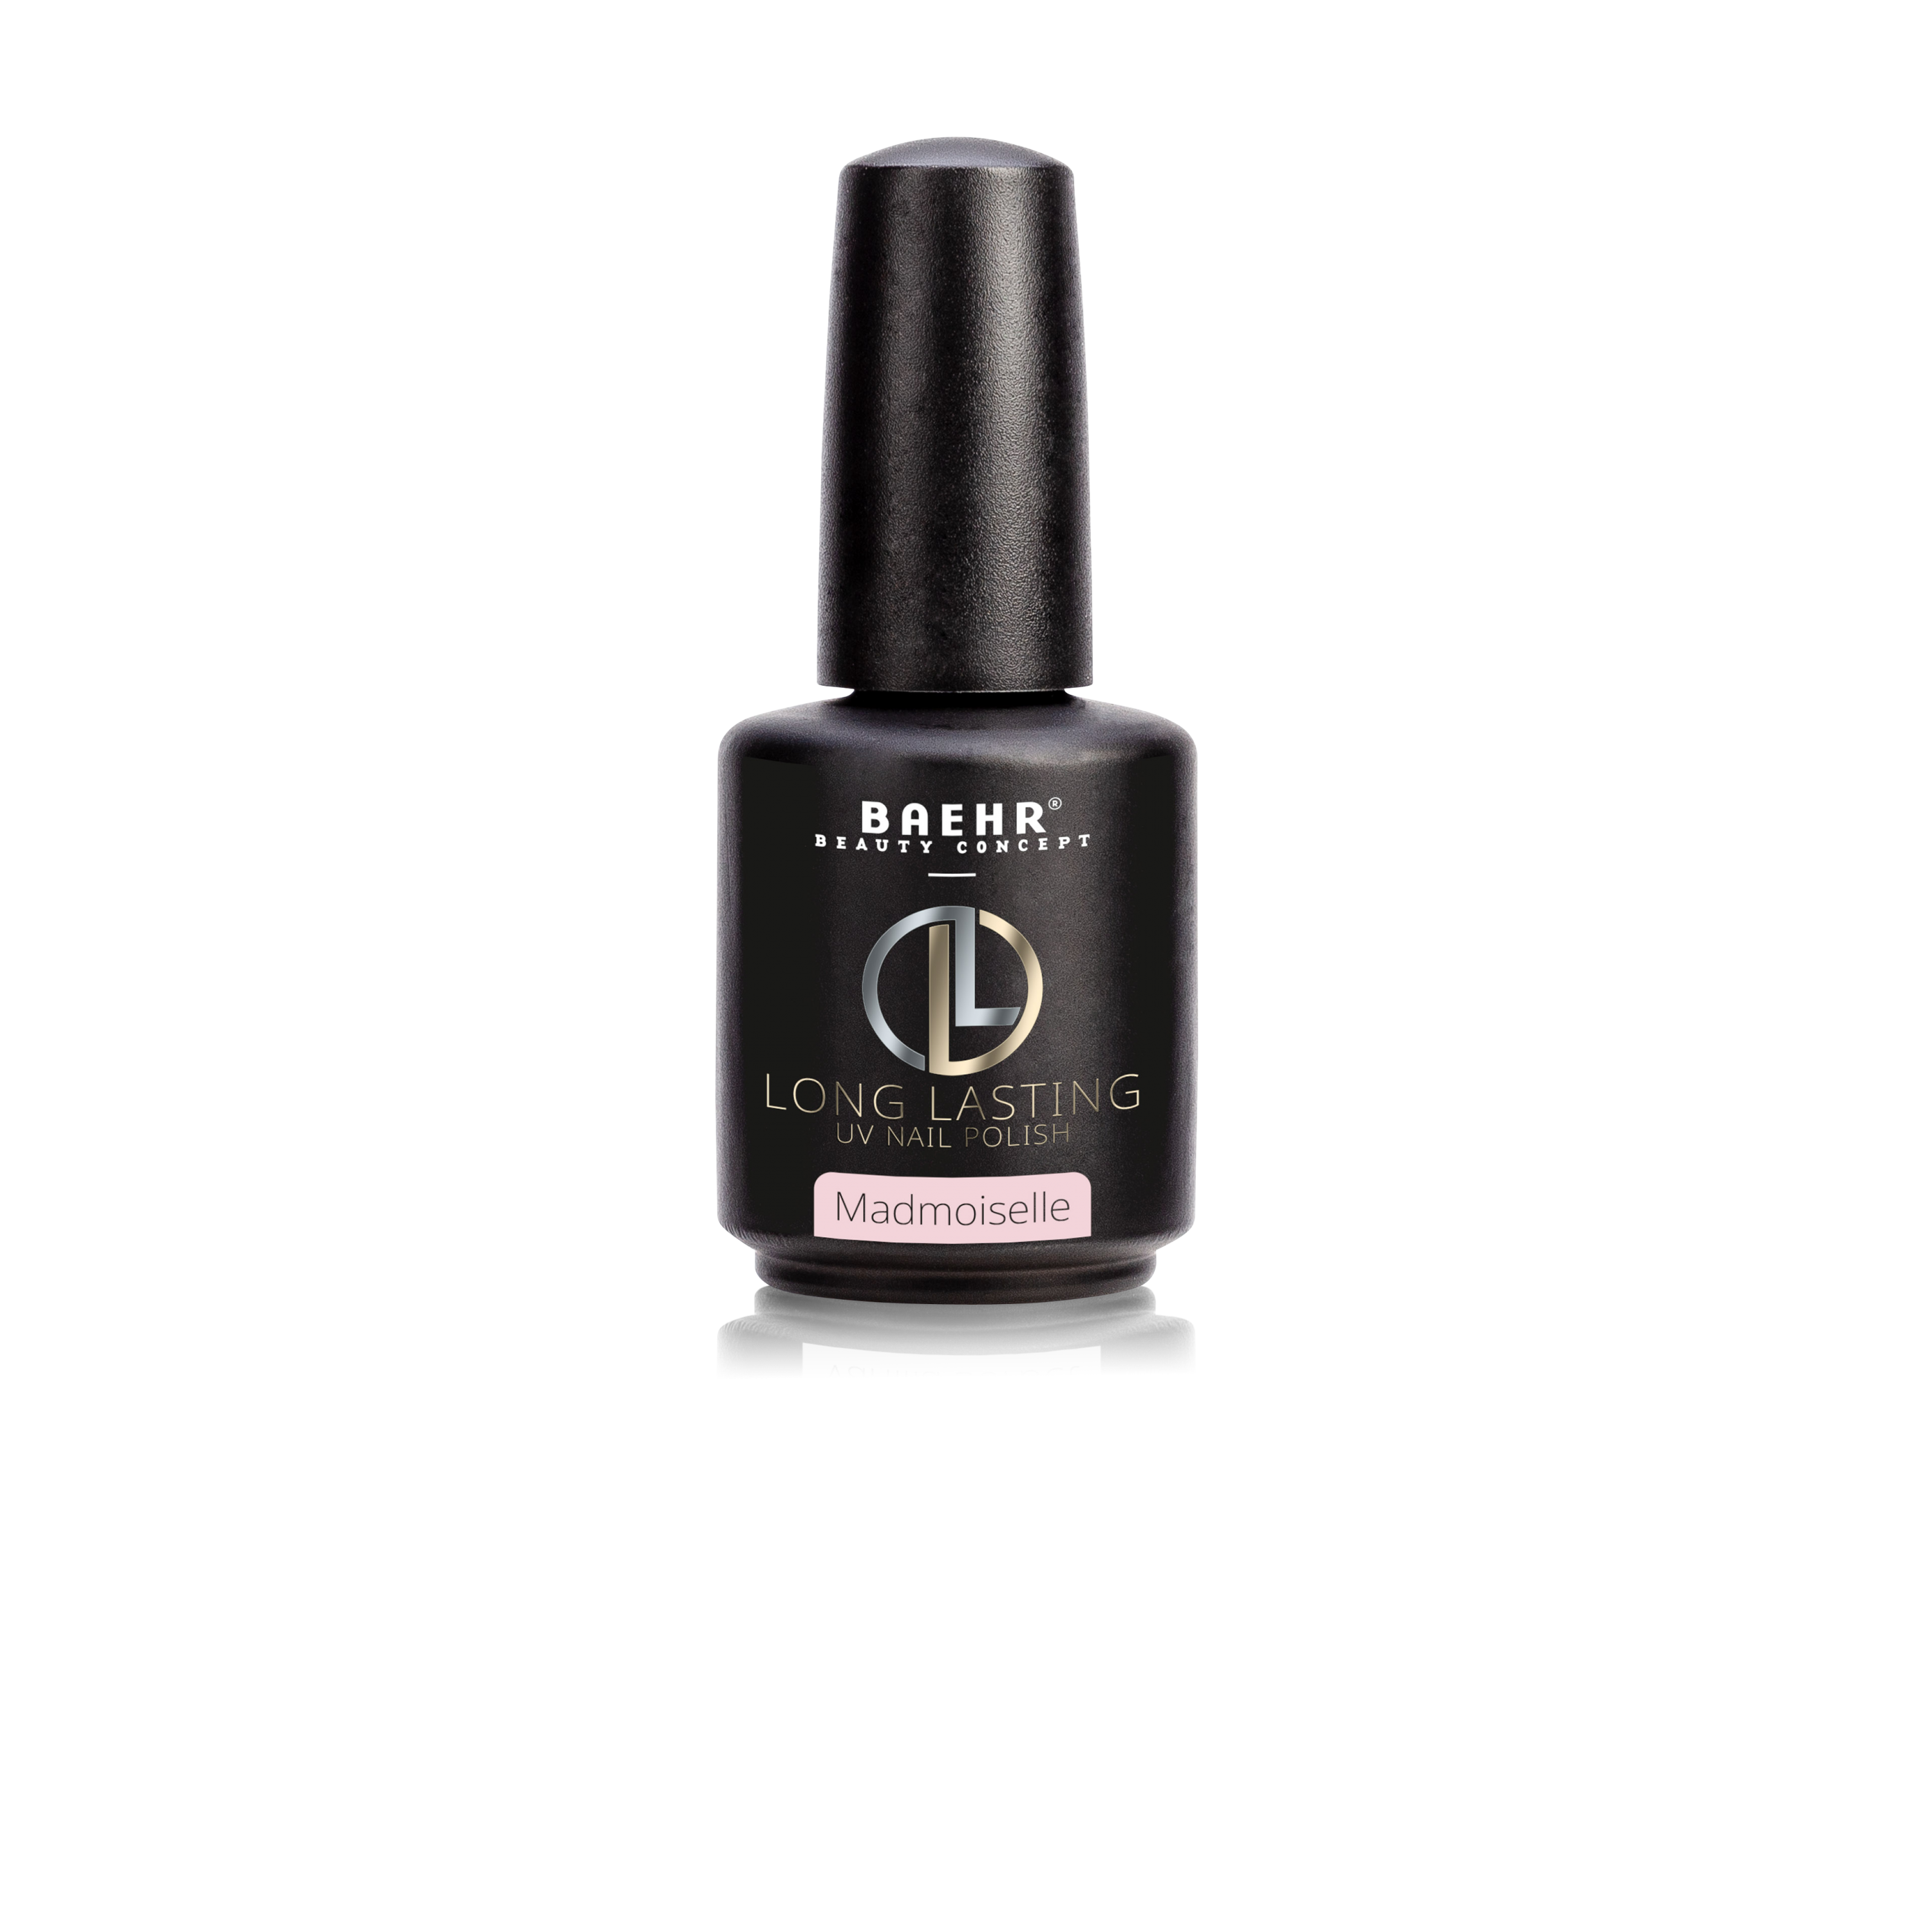 BAEHR BEAUTY CONCEPT - NAILS Long Lasting Mademoiselle 13 g